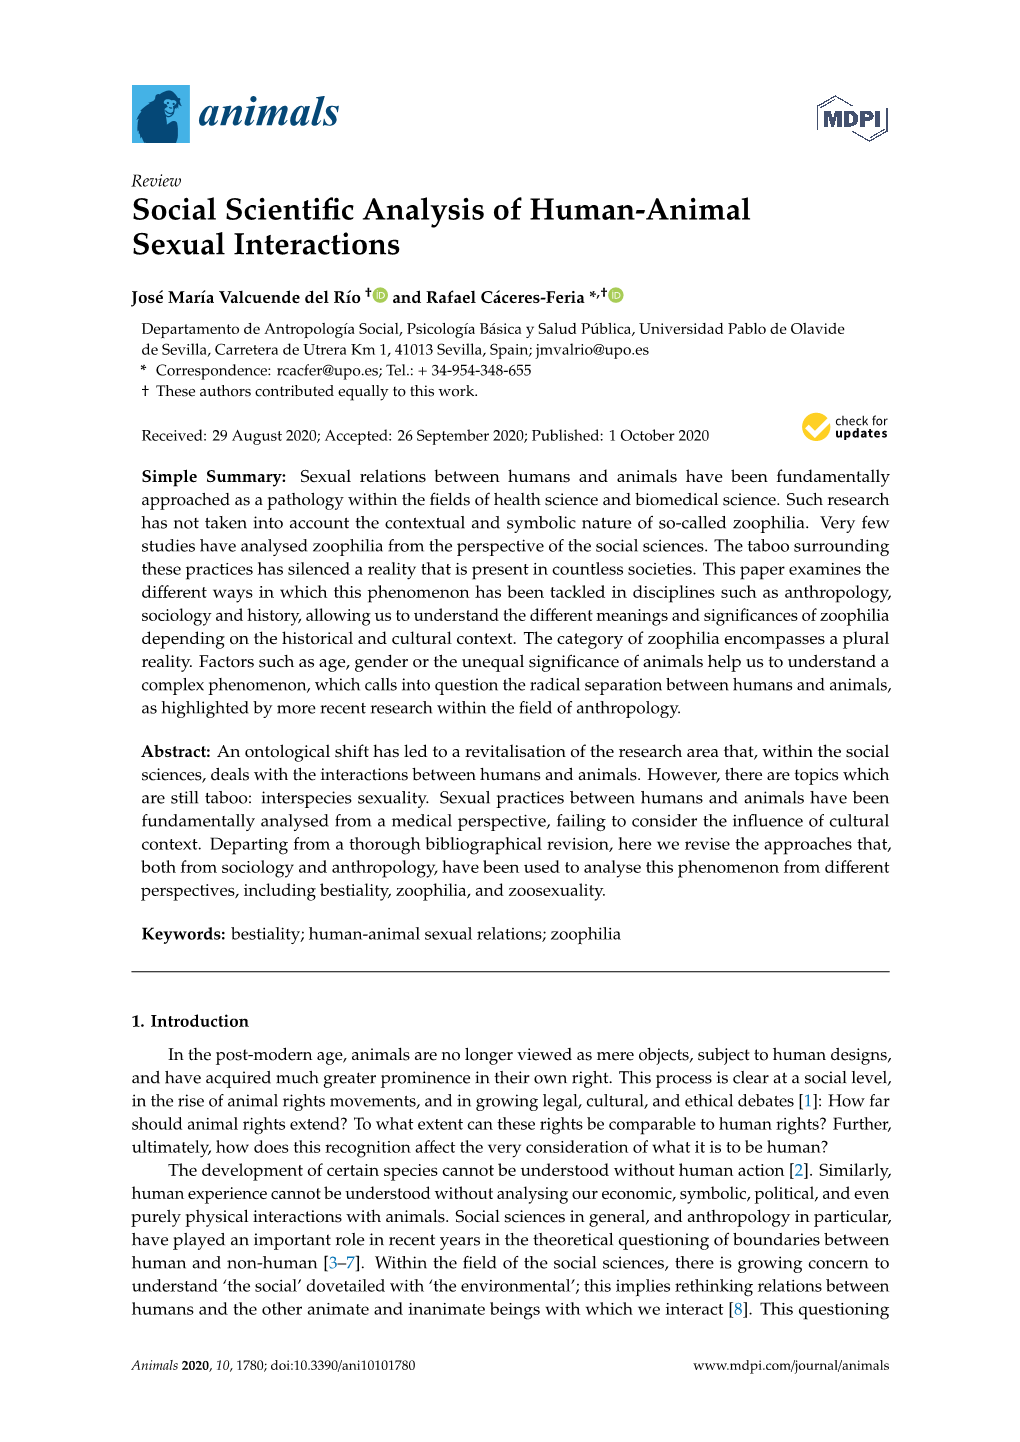 Social Scientific Analysis of Human-Animal Sexual Interactions